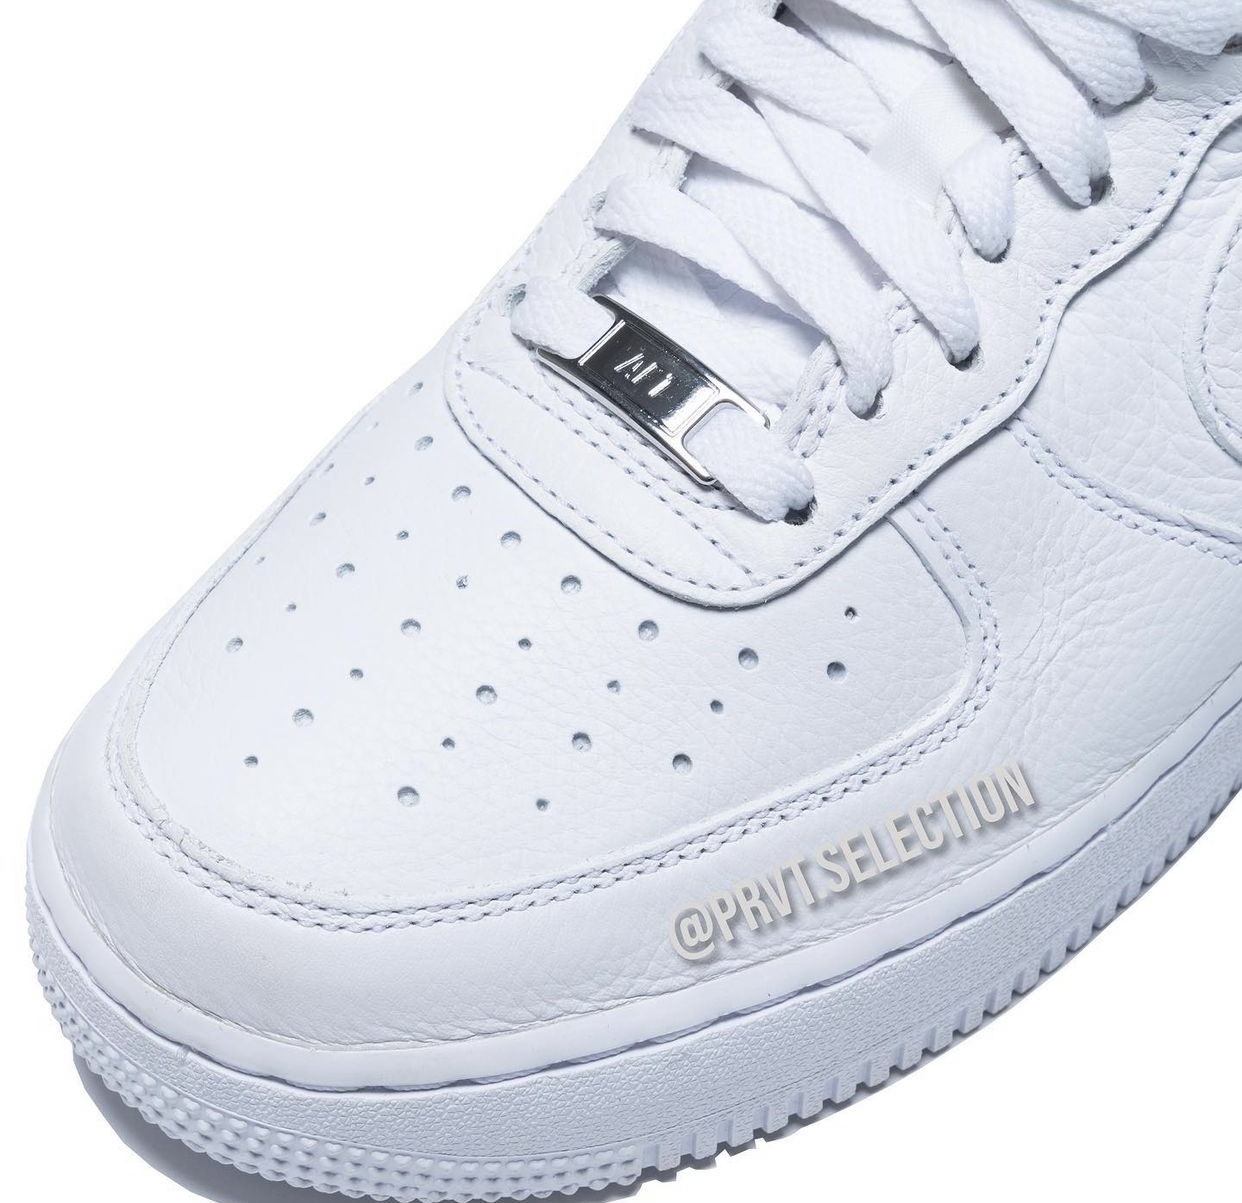 Drake NOCTA Nike Air Force 1 Certified Lover Boy CZ8065-100 Release Date